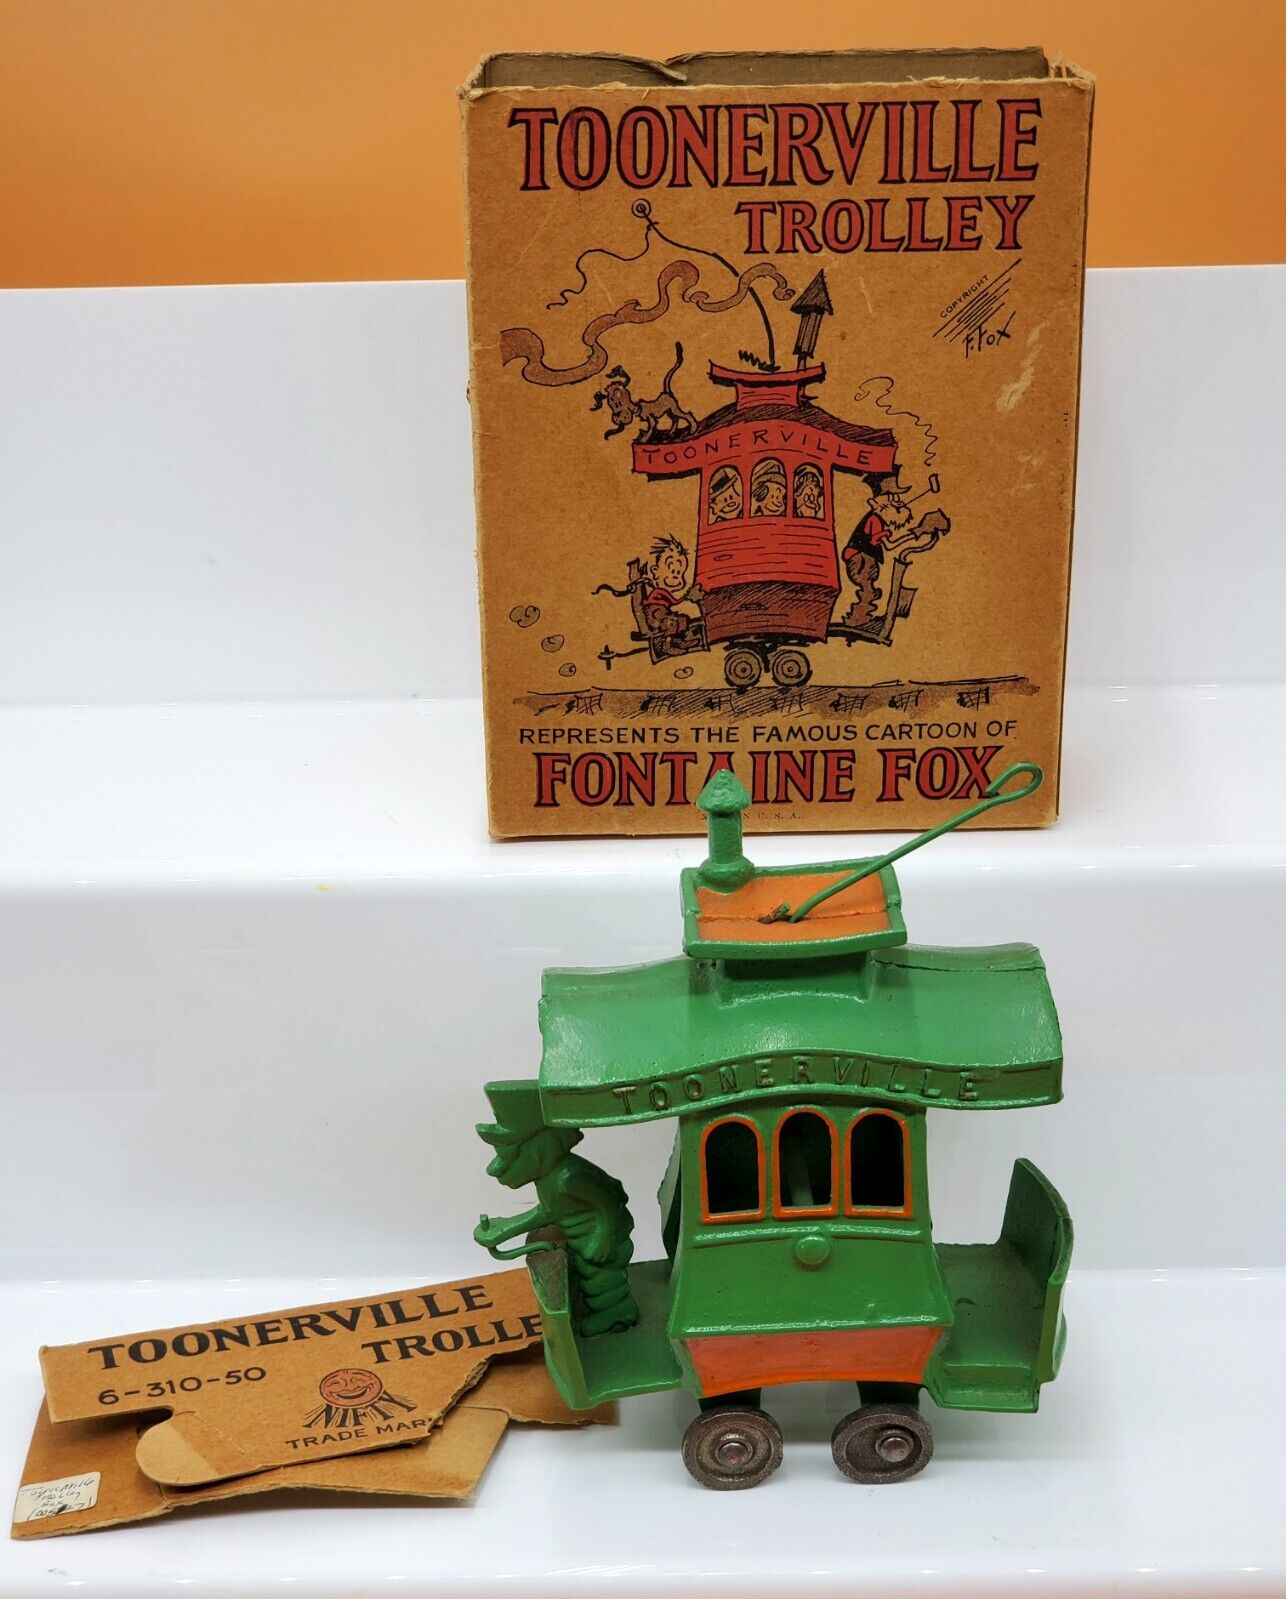 1920’s Cast Iron Toonerville Trolley Toy by Dent Mfg. with Box